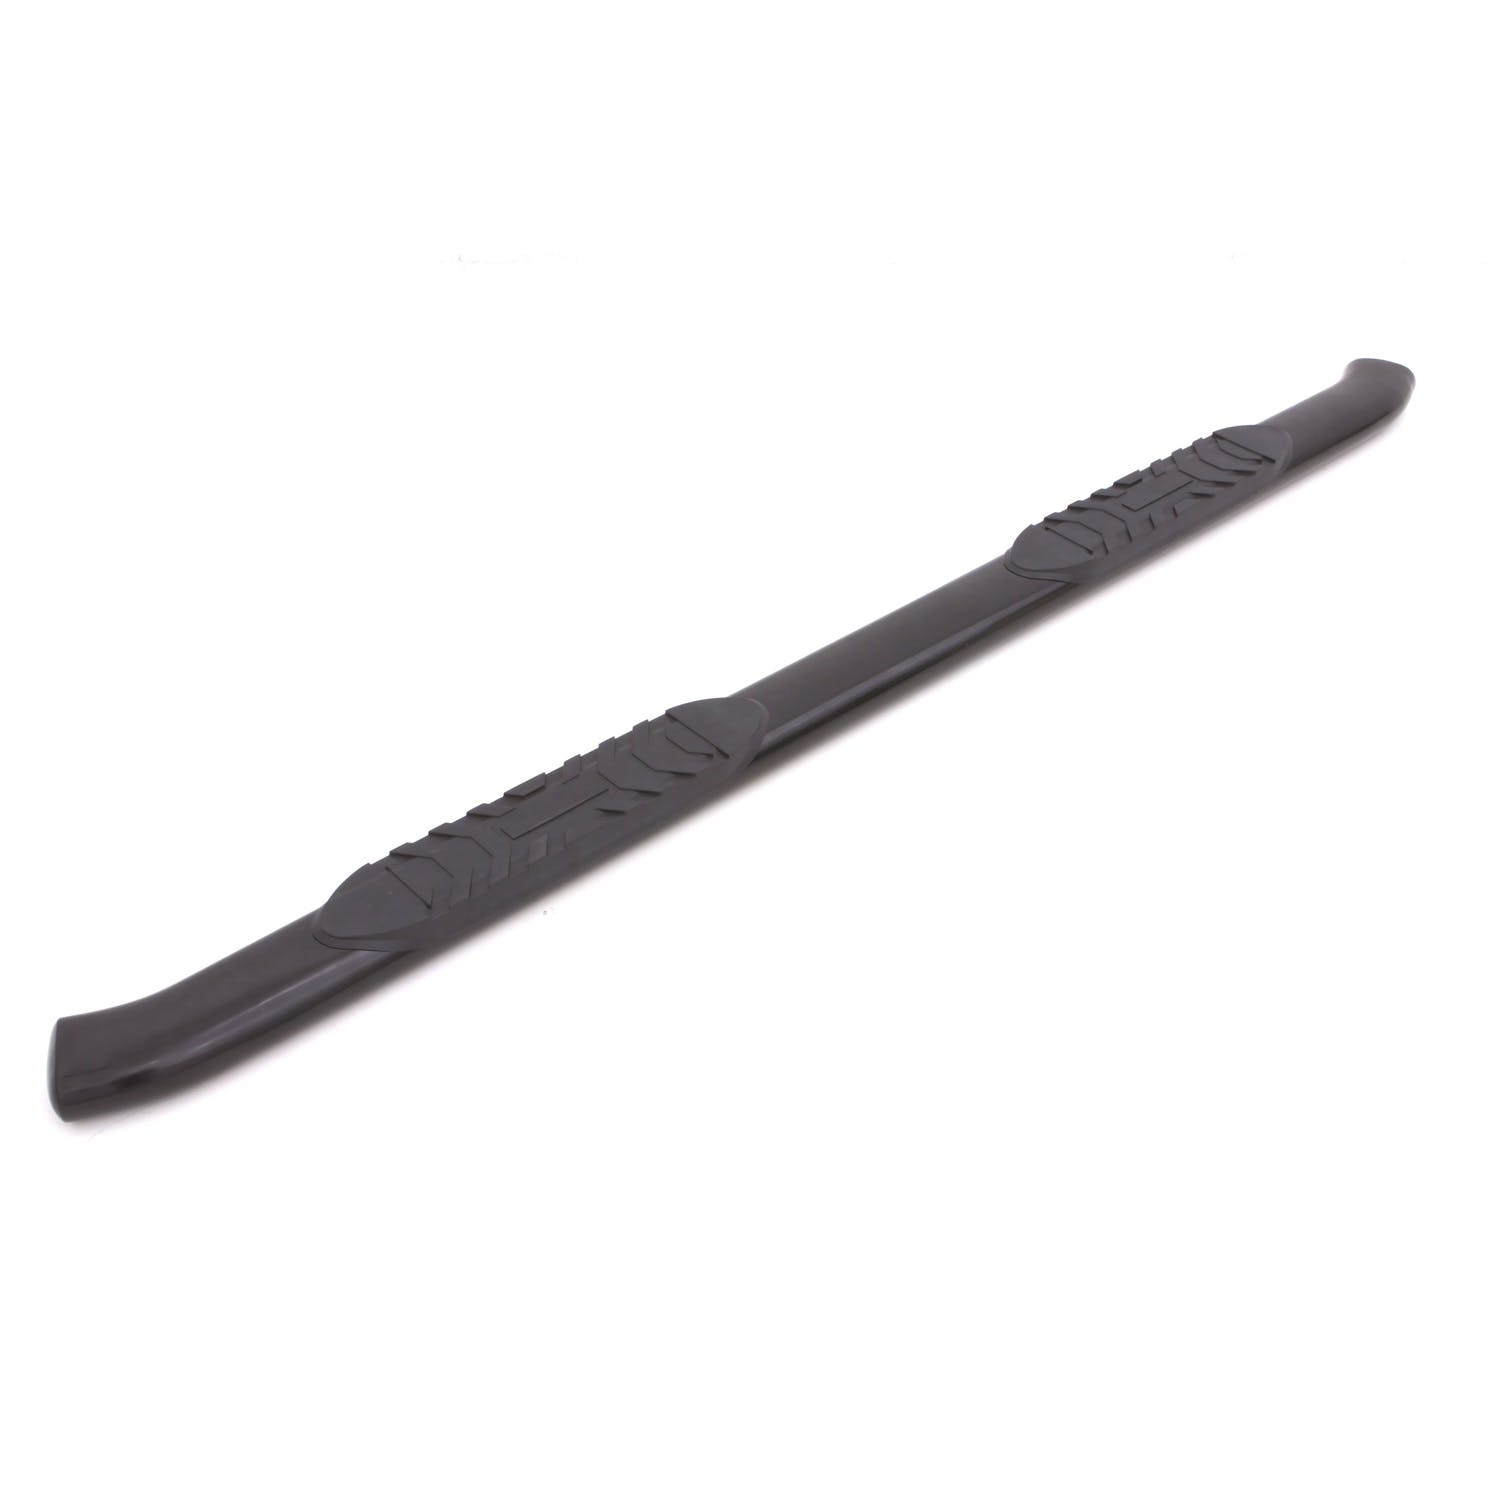 LUND 23876499 5 Inch Oval Curved Nerf Bar - Black 5 In OVAL CURVED STEEL